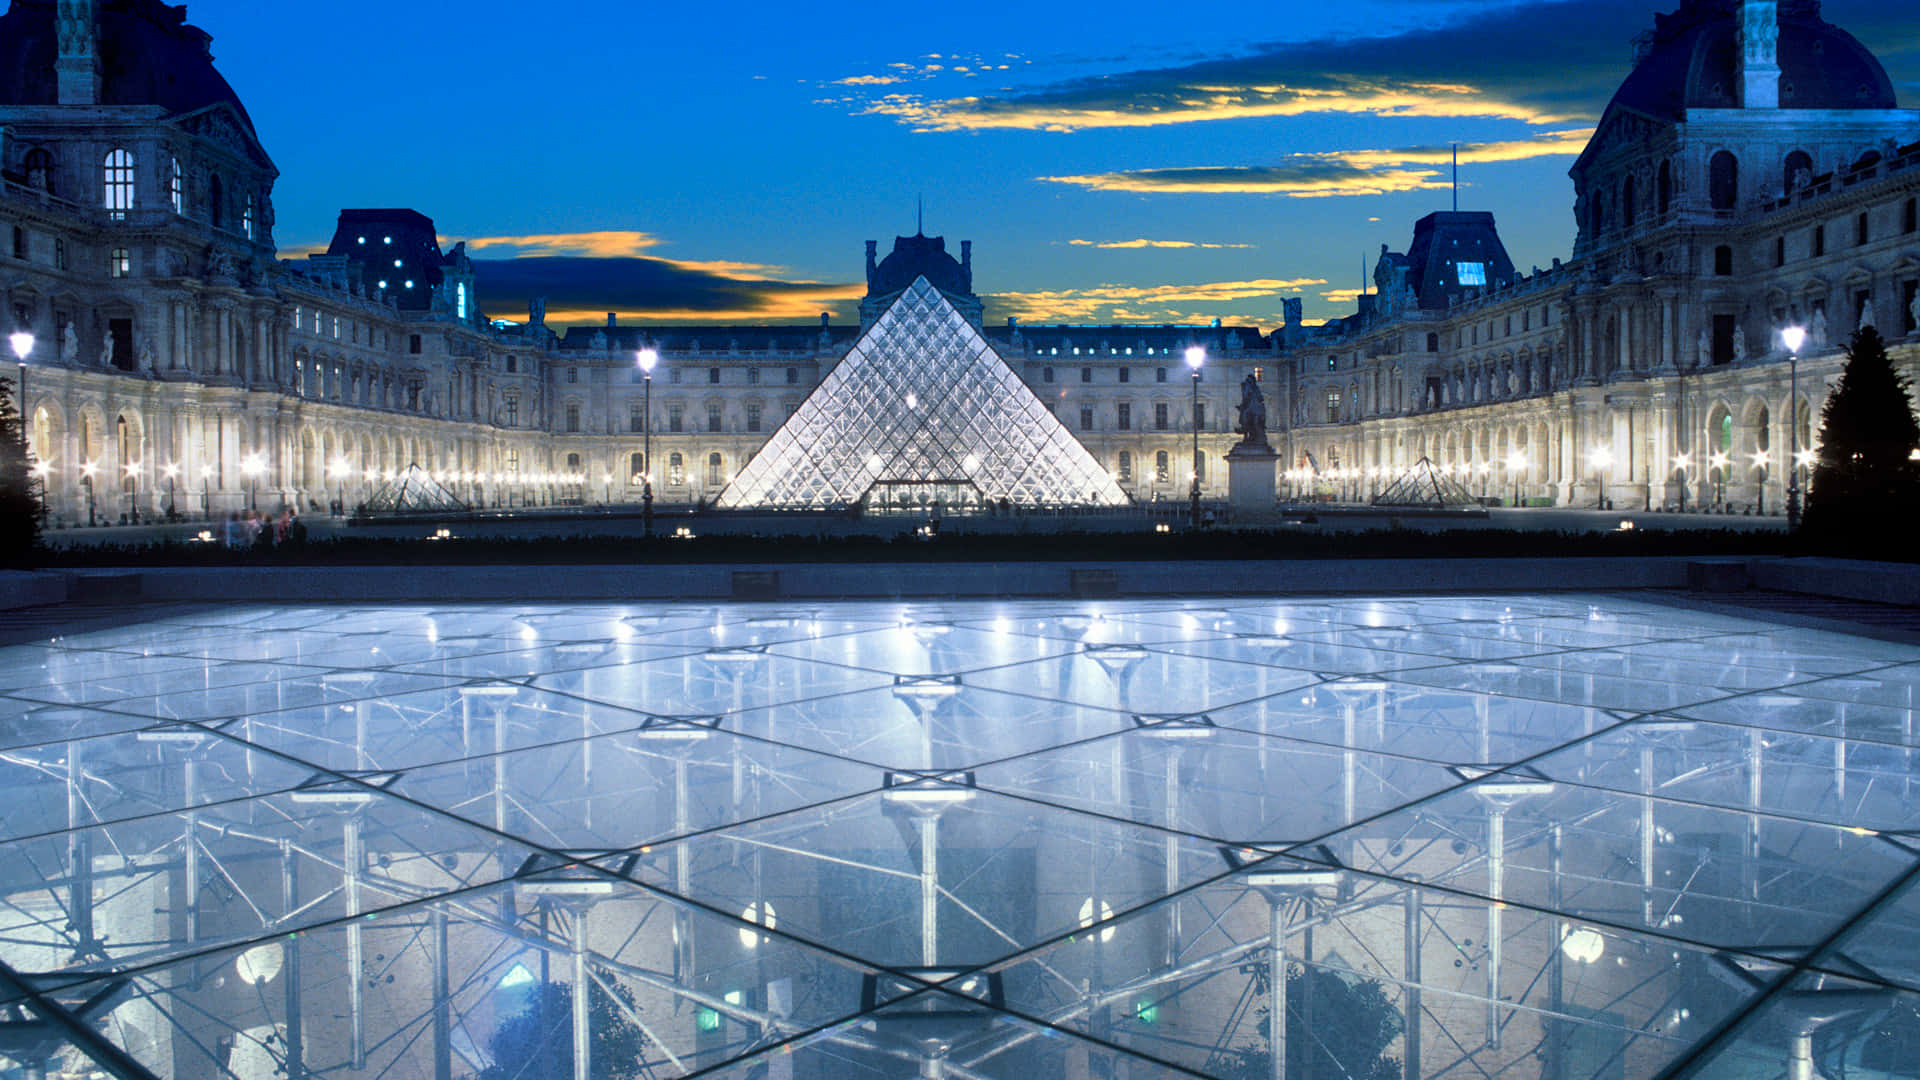 Inverted Pyramid At The Louvre Museum Wallpaper